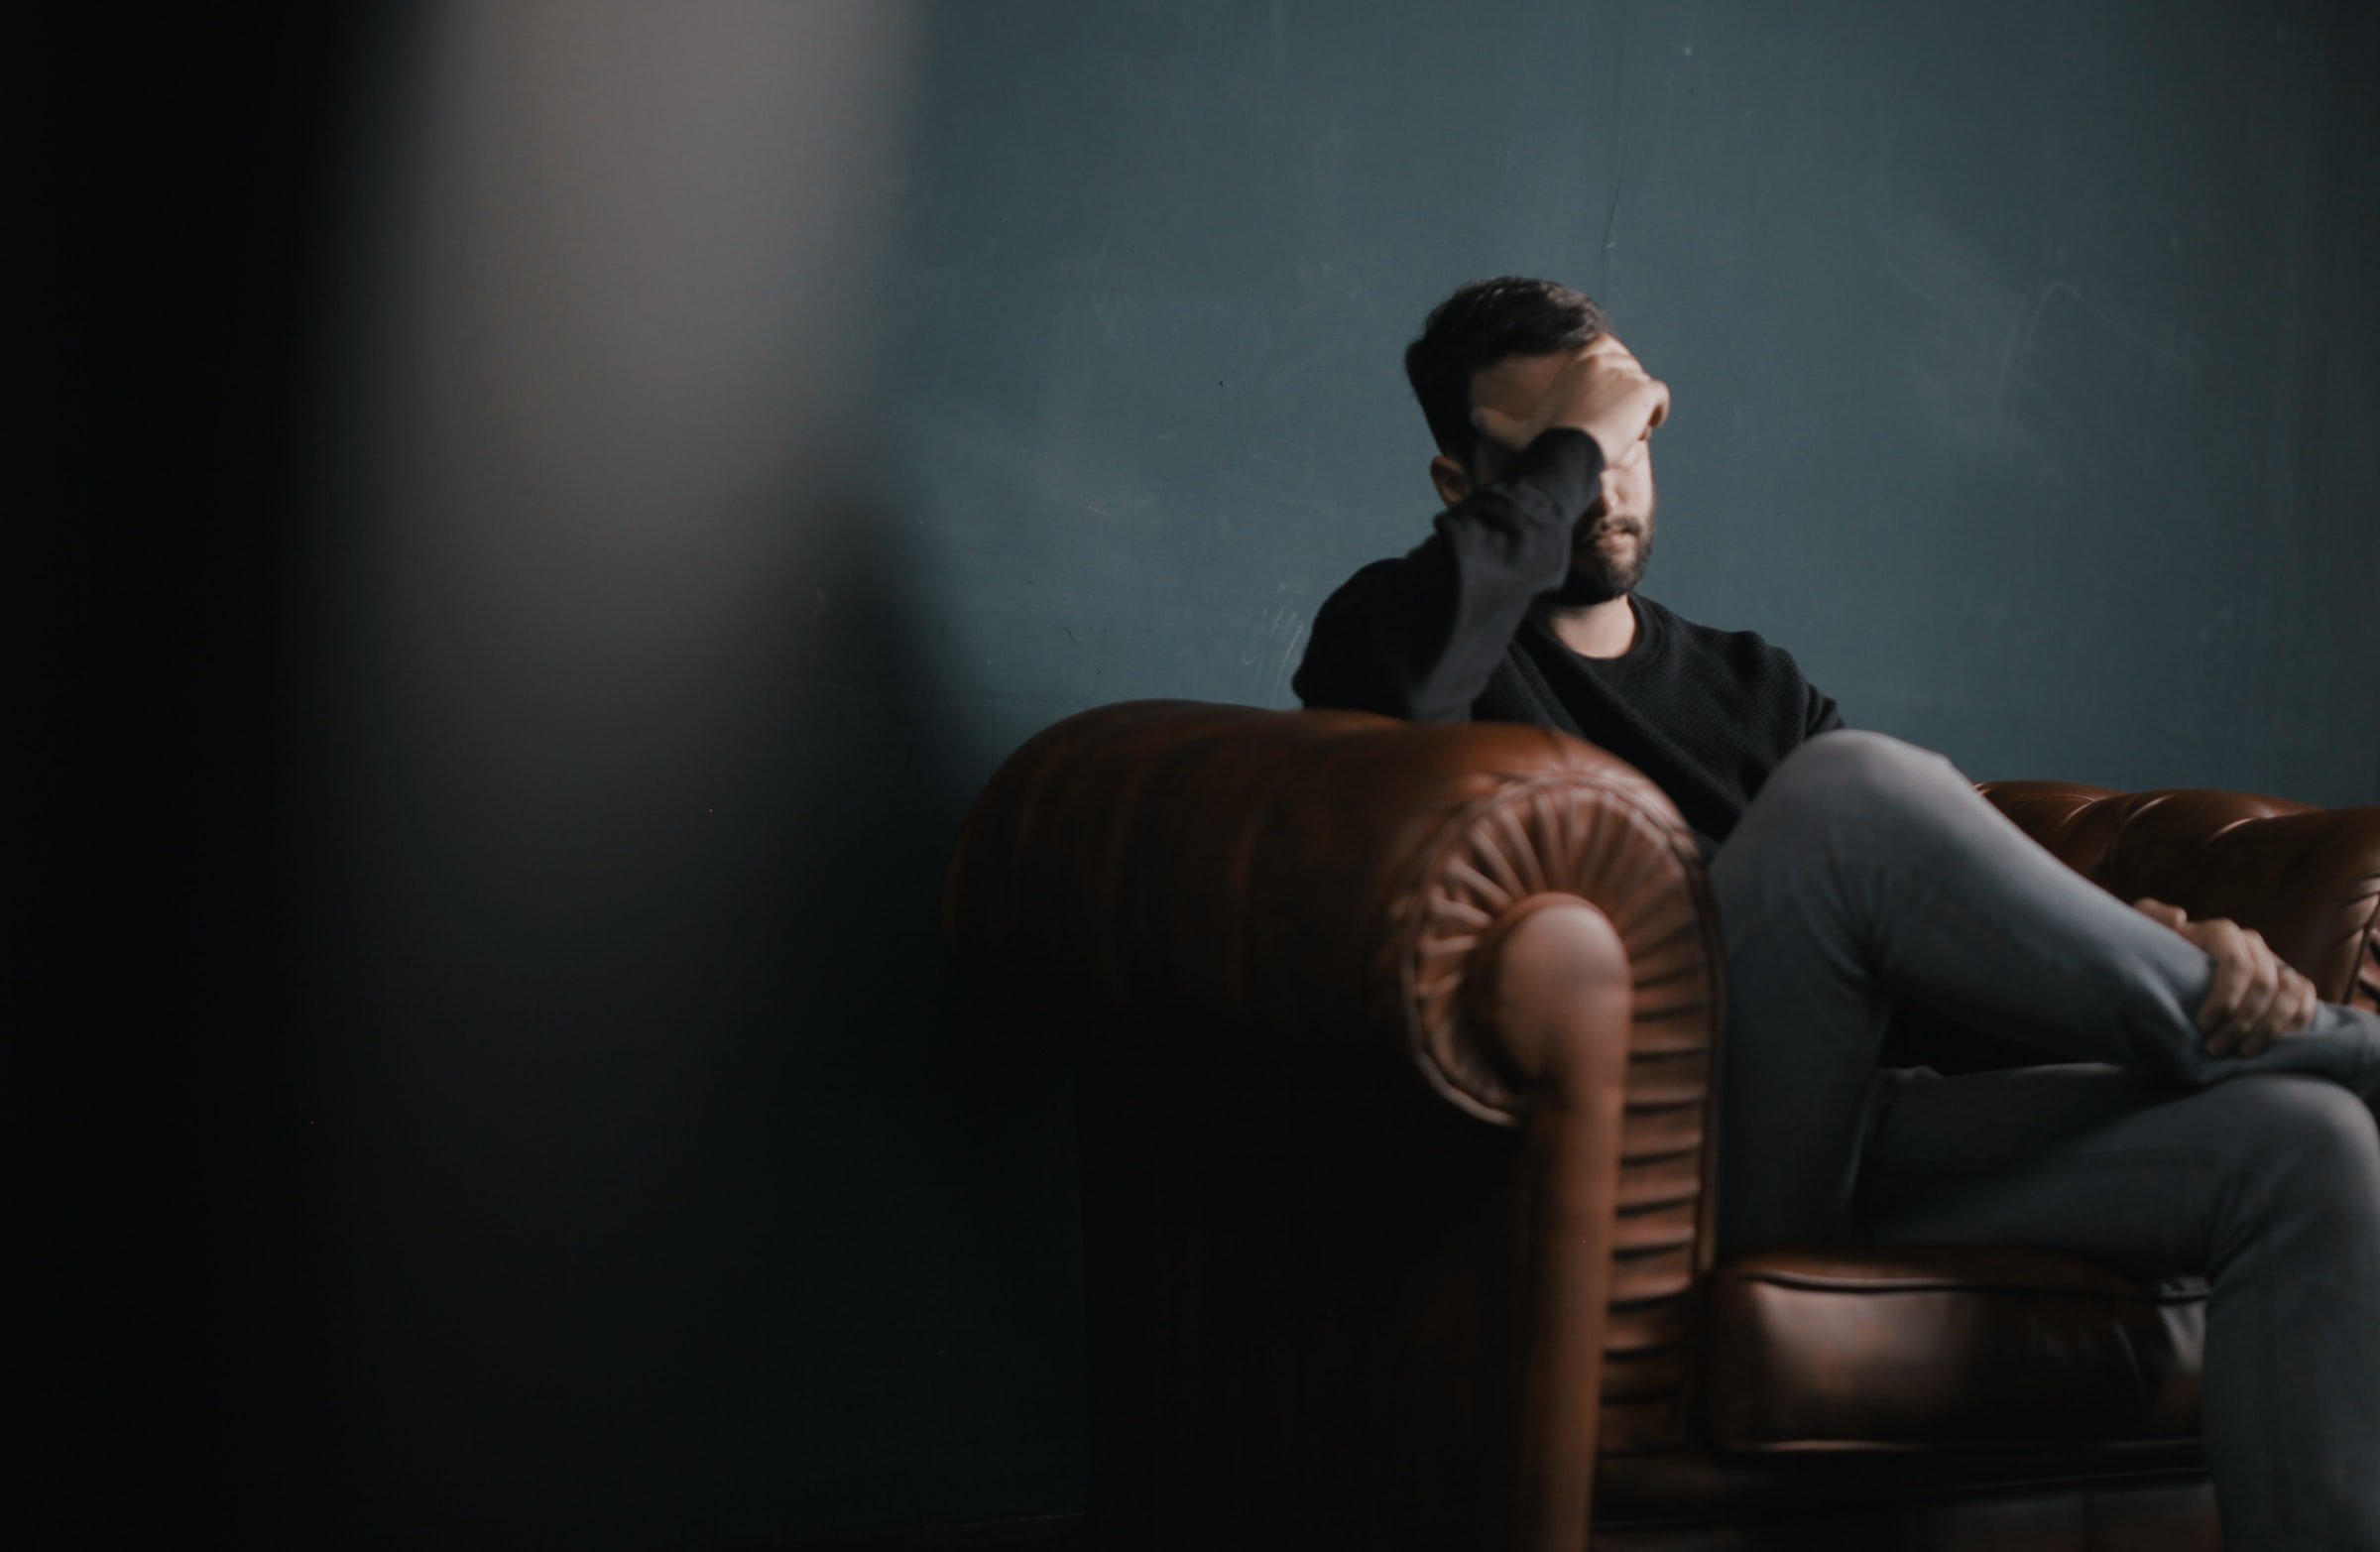 Man sitting on a couch with a hand on his face. | Source: Unsplash